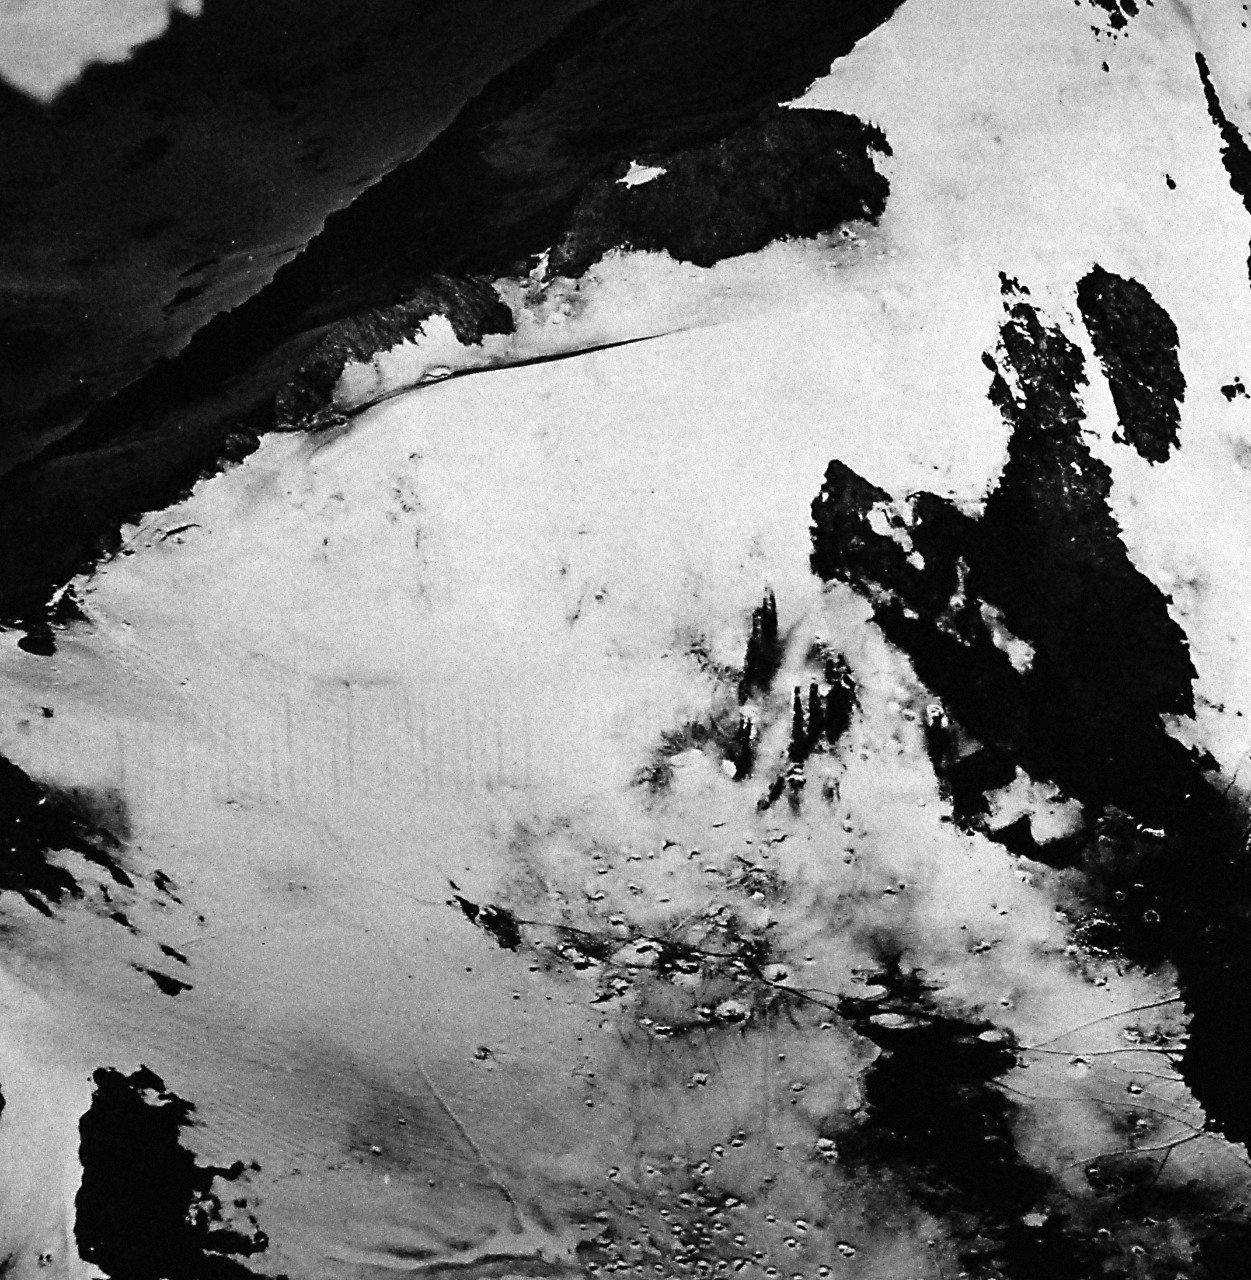 80-G-41840:   Aleutian Islands Campaign, June 1942 - August 1943.   Battle of Attu, May 11-29, 1943.    Aerial of Japanese positions on Attu, Aleutian Islands.  United States Navy photographers flew over the Japanese position on Attu Island, making pictures at will during the last days of the organized Japanese resistence there.  These two pictures were made as the foe was being driven back and into the Chicagof Harbor valley, his last stronghold.   Along the crest and in the bowl (foreground) are Japanese trails and foxholes in the snow, as well as holes from American firing.  The foe was making a stand along the ridge before being driven back to Chicagof Harbor valley, which is straight down from the ridge (upper left).  The scene was southwest of Chicagof Harbor, looking northeast.  Photographed May 24, 1943.  U.S. Navy Photograph, now in the collections of the National Archives.  (2016/05/10).